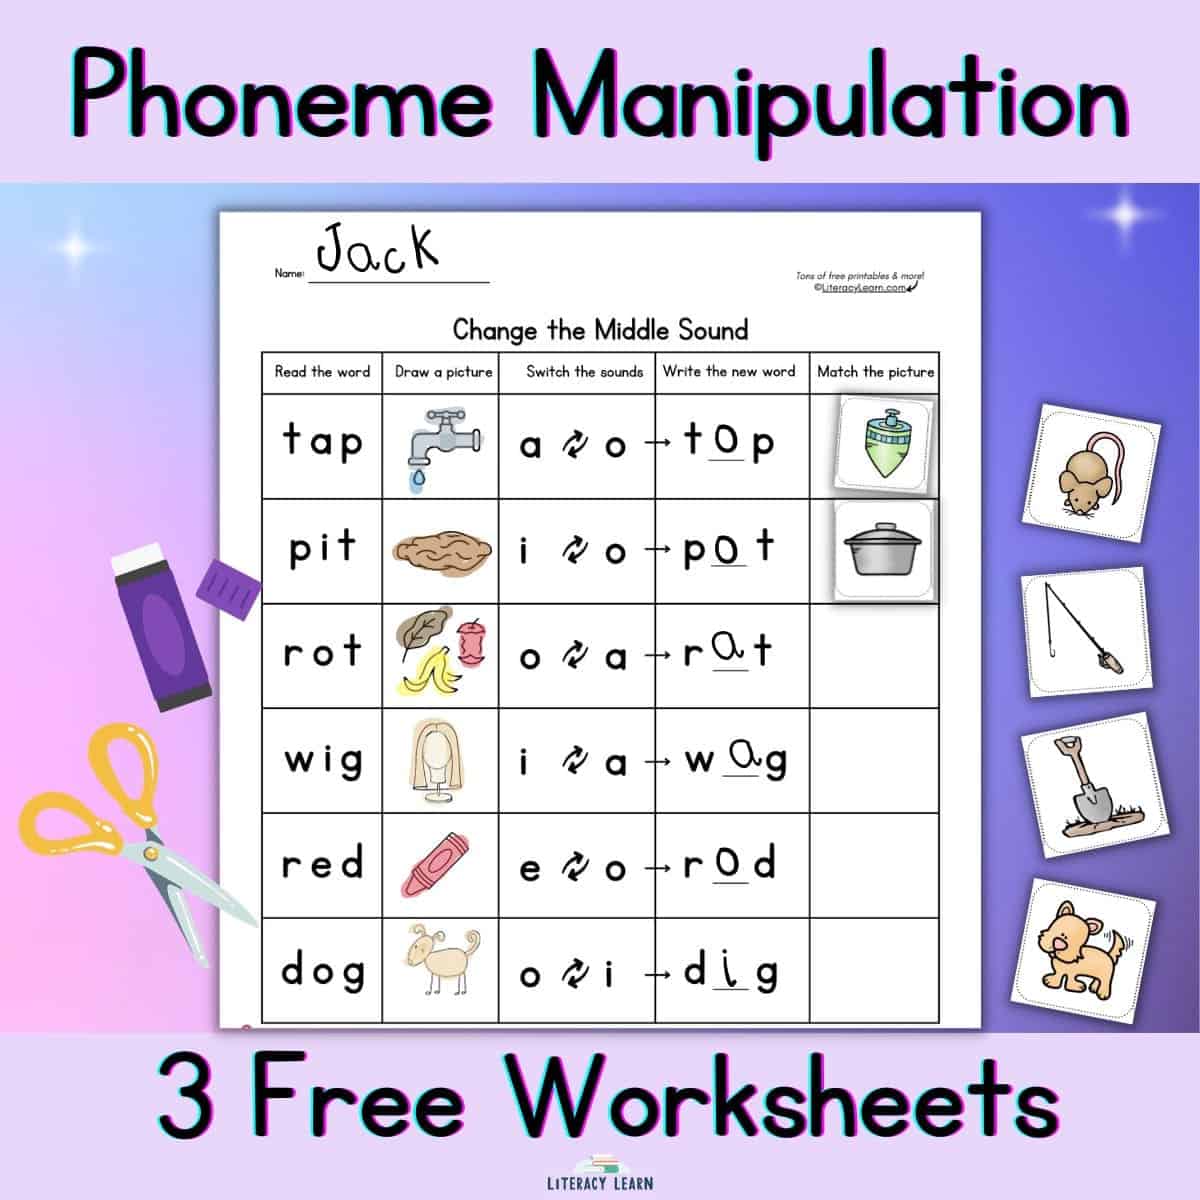 Purple graphic entitled "phoneme manipulation' with sample free worksheet and activity.